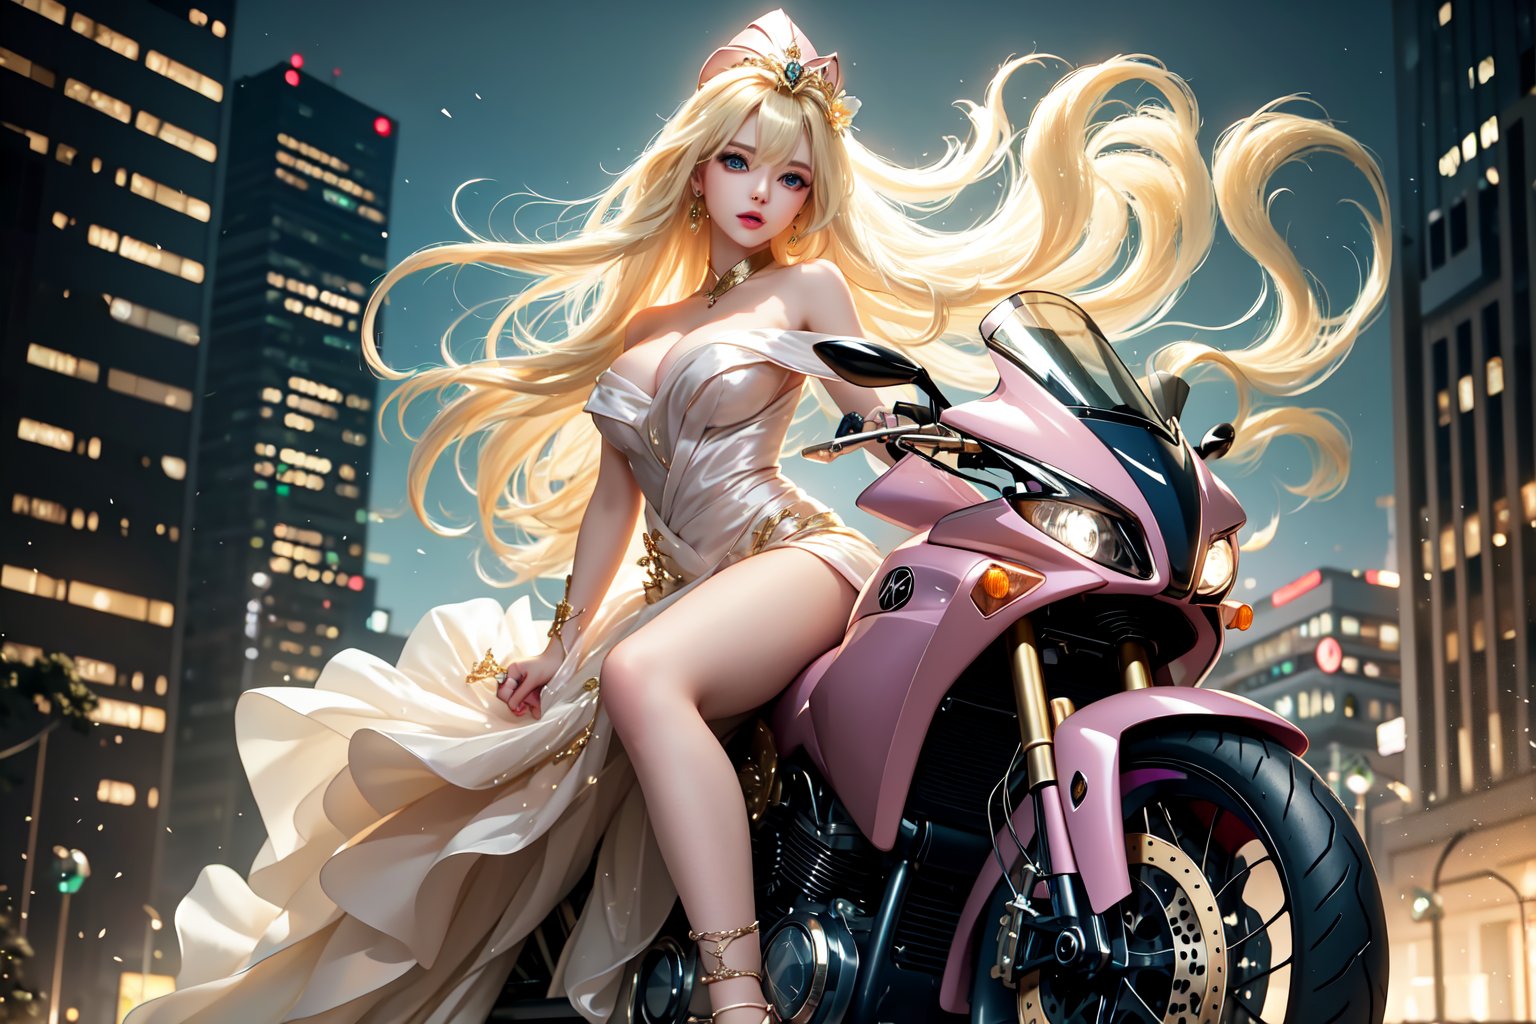 In a neon-drenched urban landscape, a sultry goddess astride a powerful motorcycle strikes a confident pose amidst towering skyscrapers. The vibrant glow illuminates the blue-pink frilled wedding dress clinging to her curves, showcasing the Wizard's hat-adorned bangs and off-shoulder design. Blond locks cascade down like a river, framing her striking features and golden hair flowing behind her. Piercing blue eyes gleam with mischief as she confronts the viewer beneath an ornate hair ornament on her flowing locks. City lights accentuate her features, highlighting sugary sweet sensuality in this Sugimori Ken-inspired art piece.